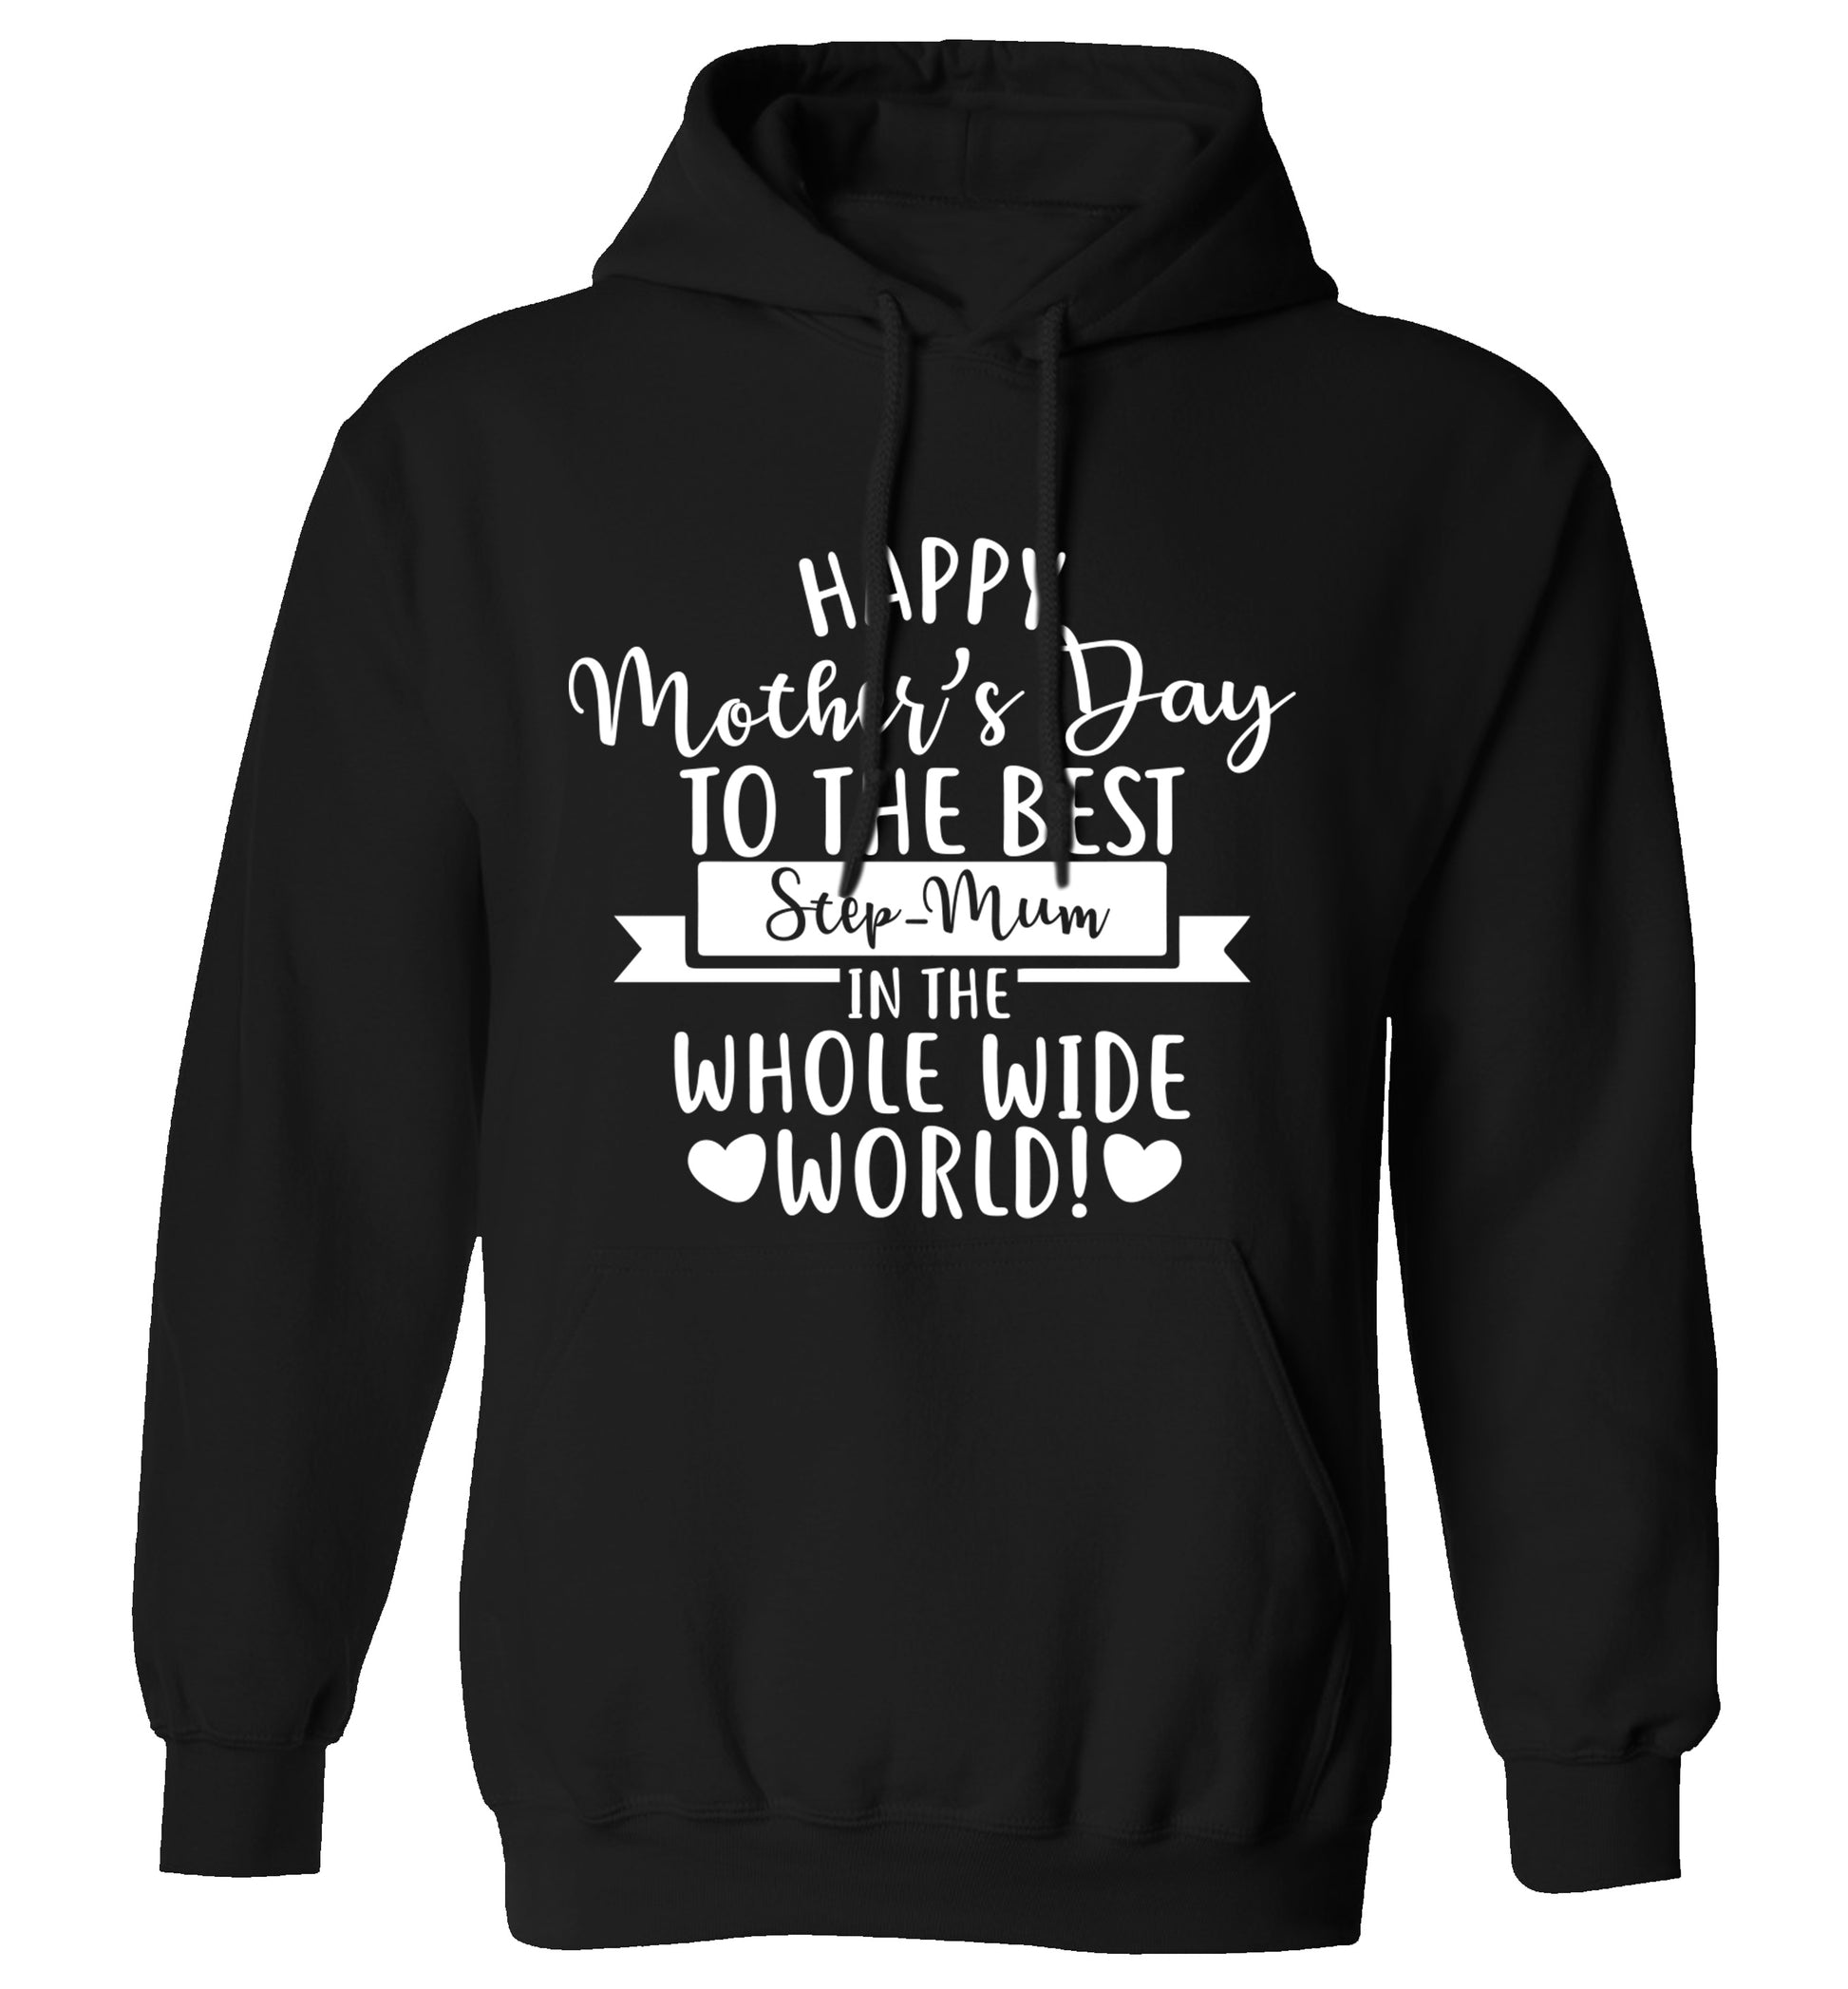 Happy mother's day to the best step-mum in the world adults unisex black hoodie 2XL